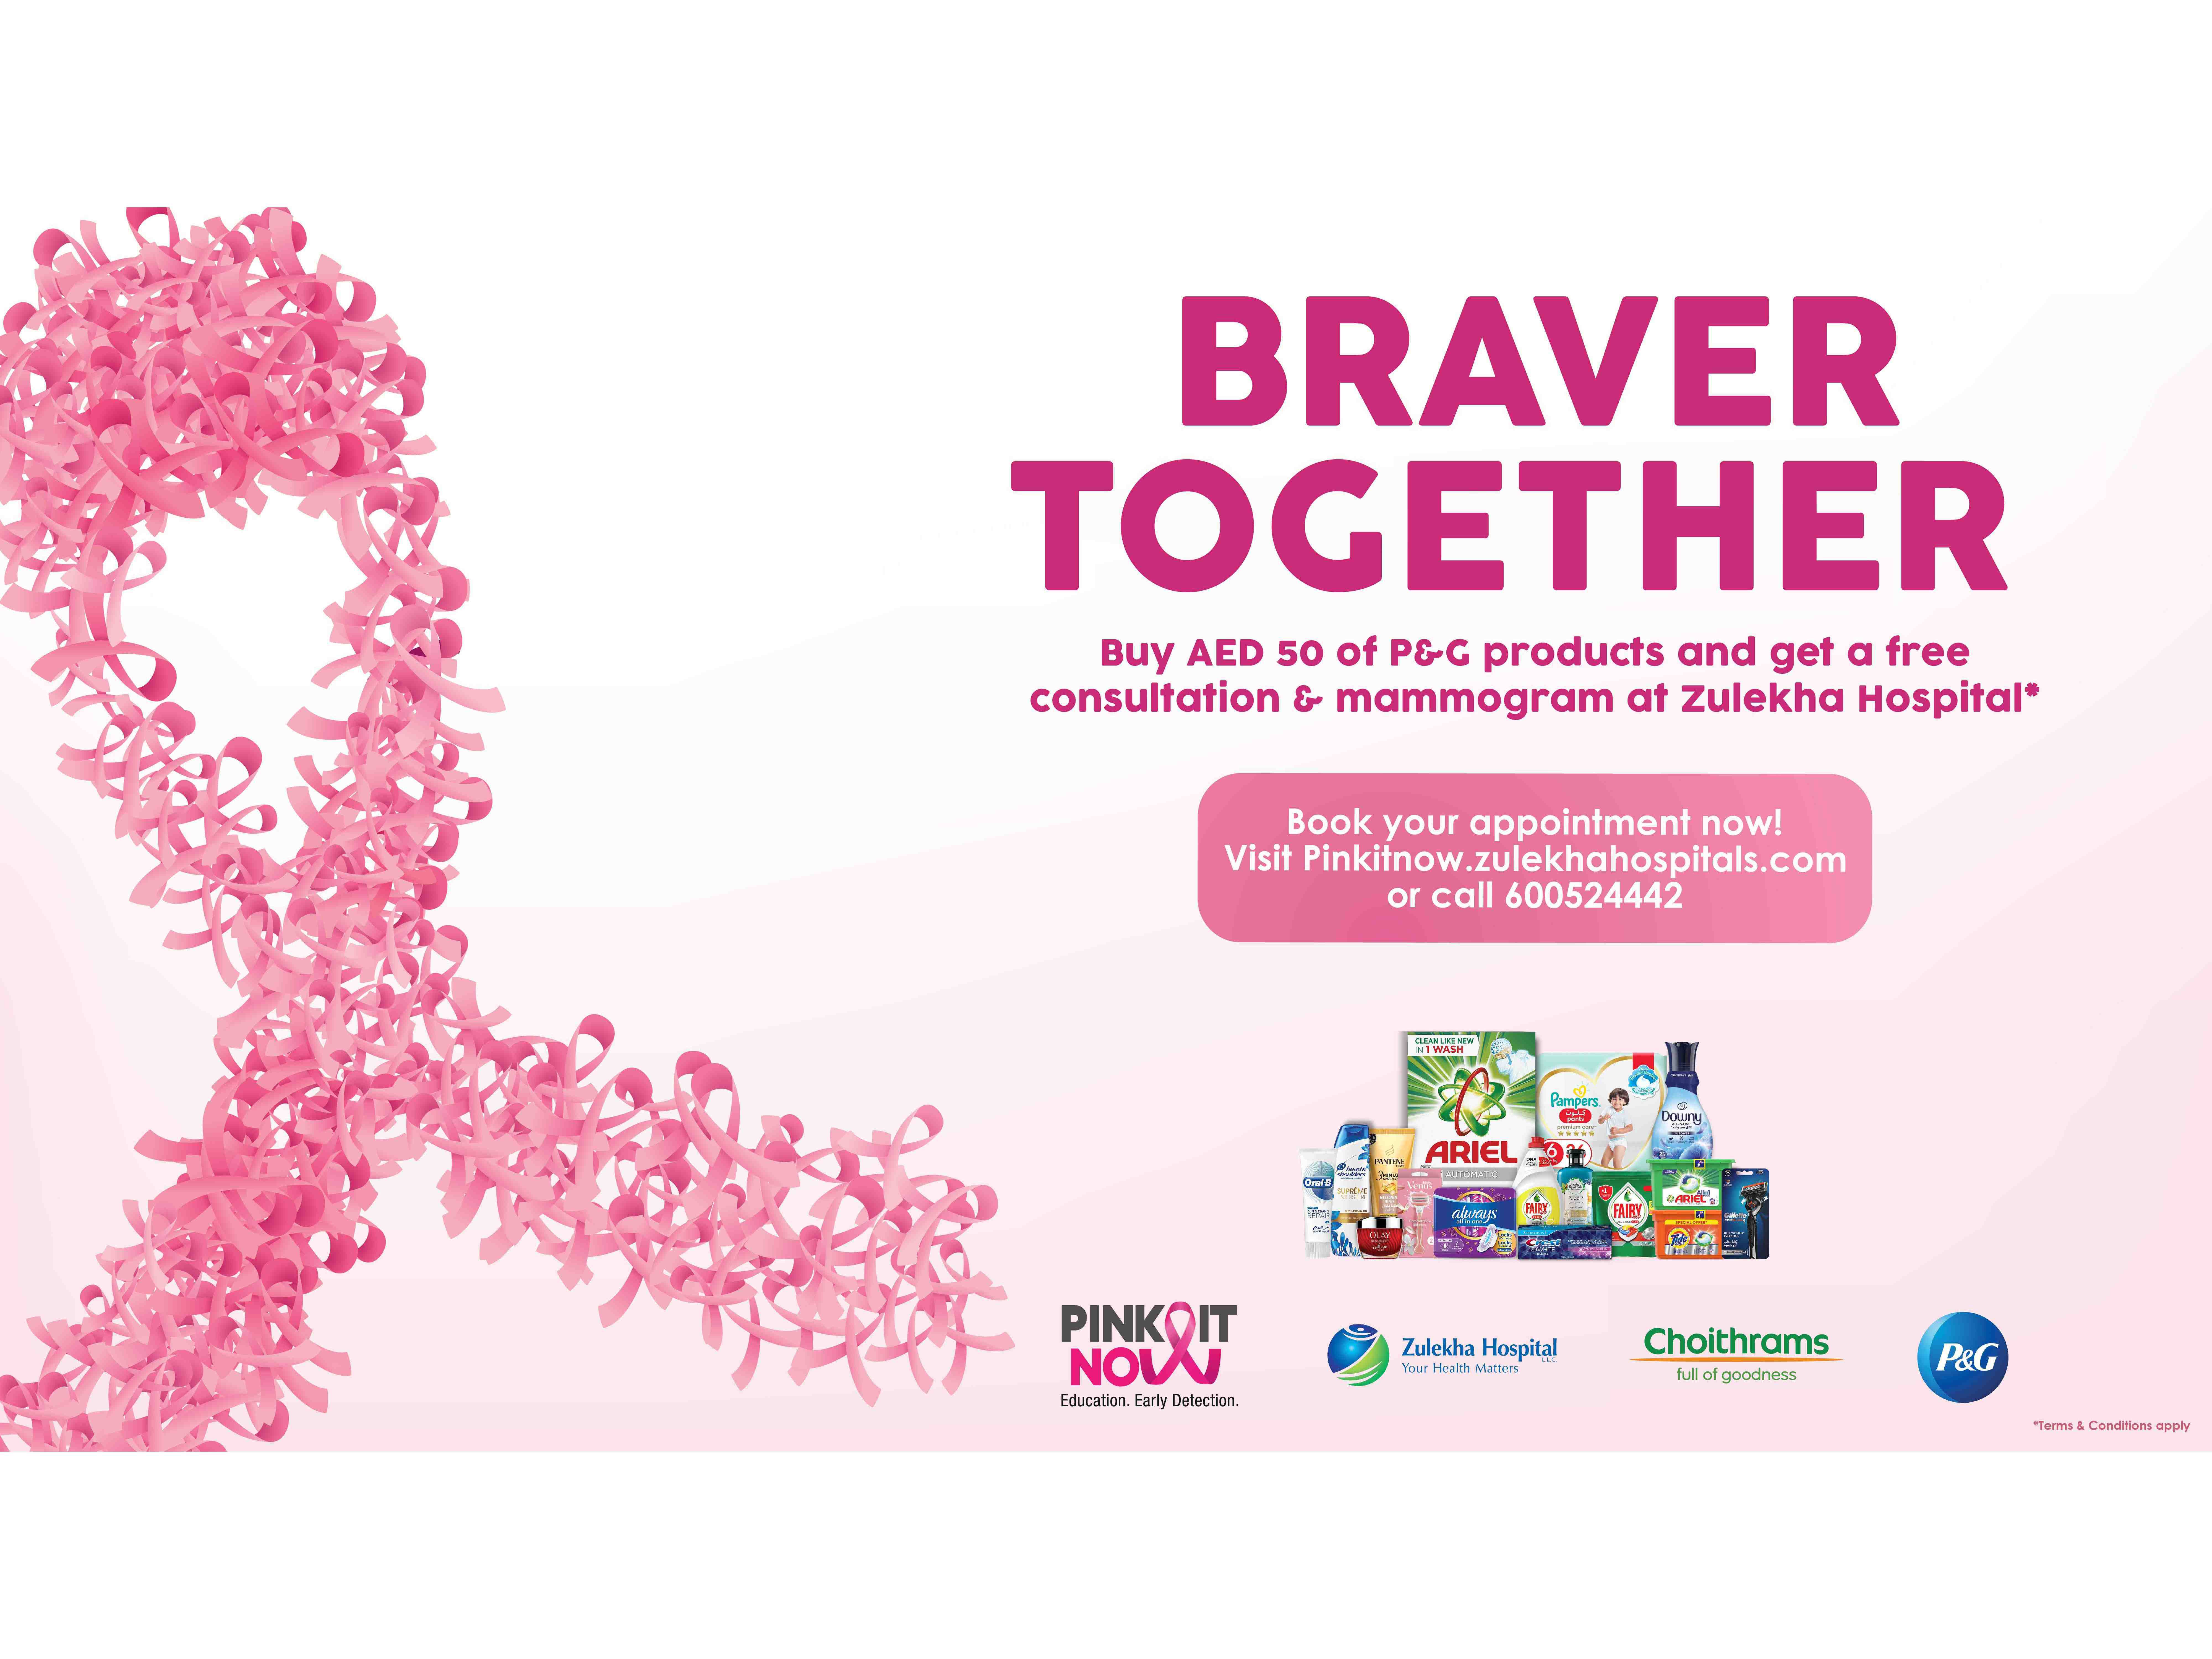 P&G, Zulekha Healthcare Group and Choithrams roll out ‘Pink it Now’ campaign in the UAE